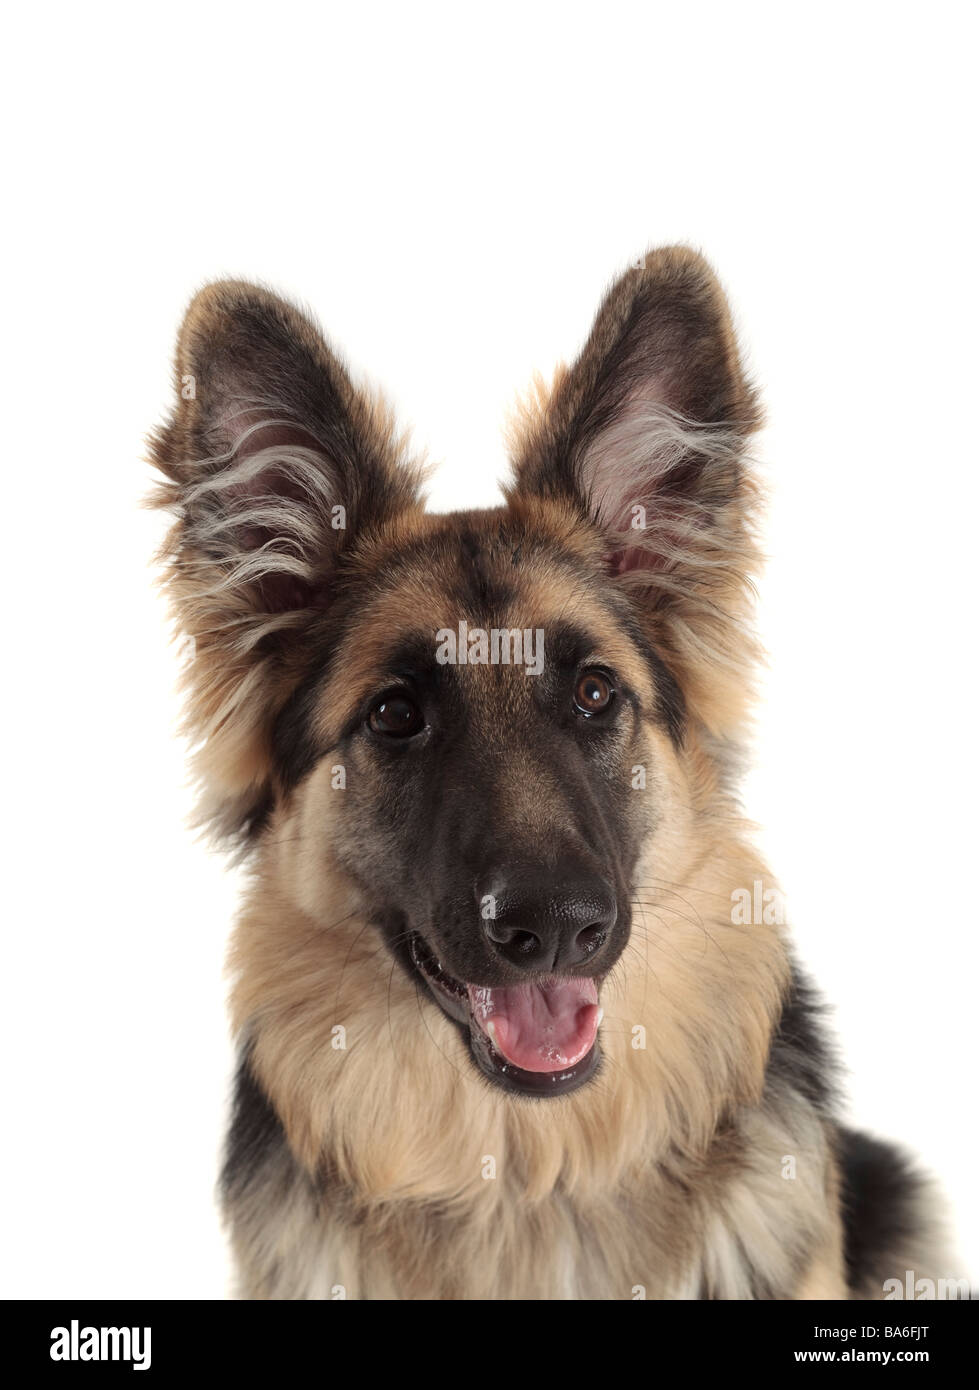 are all german shepard dogs ears up